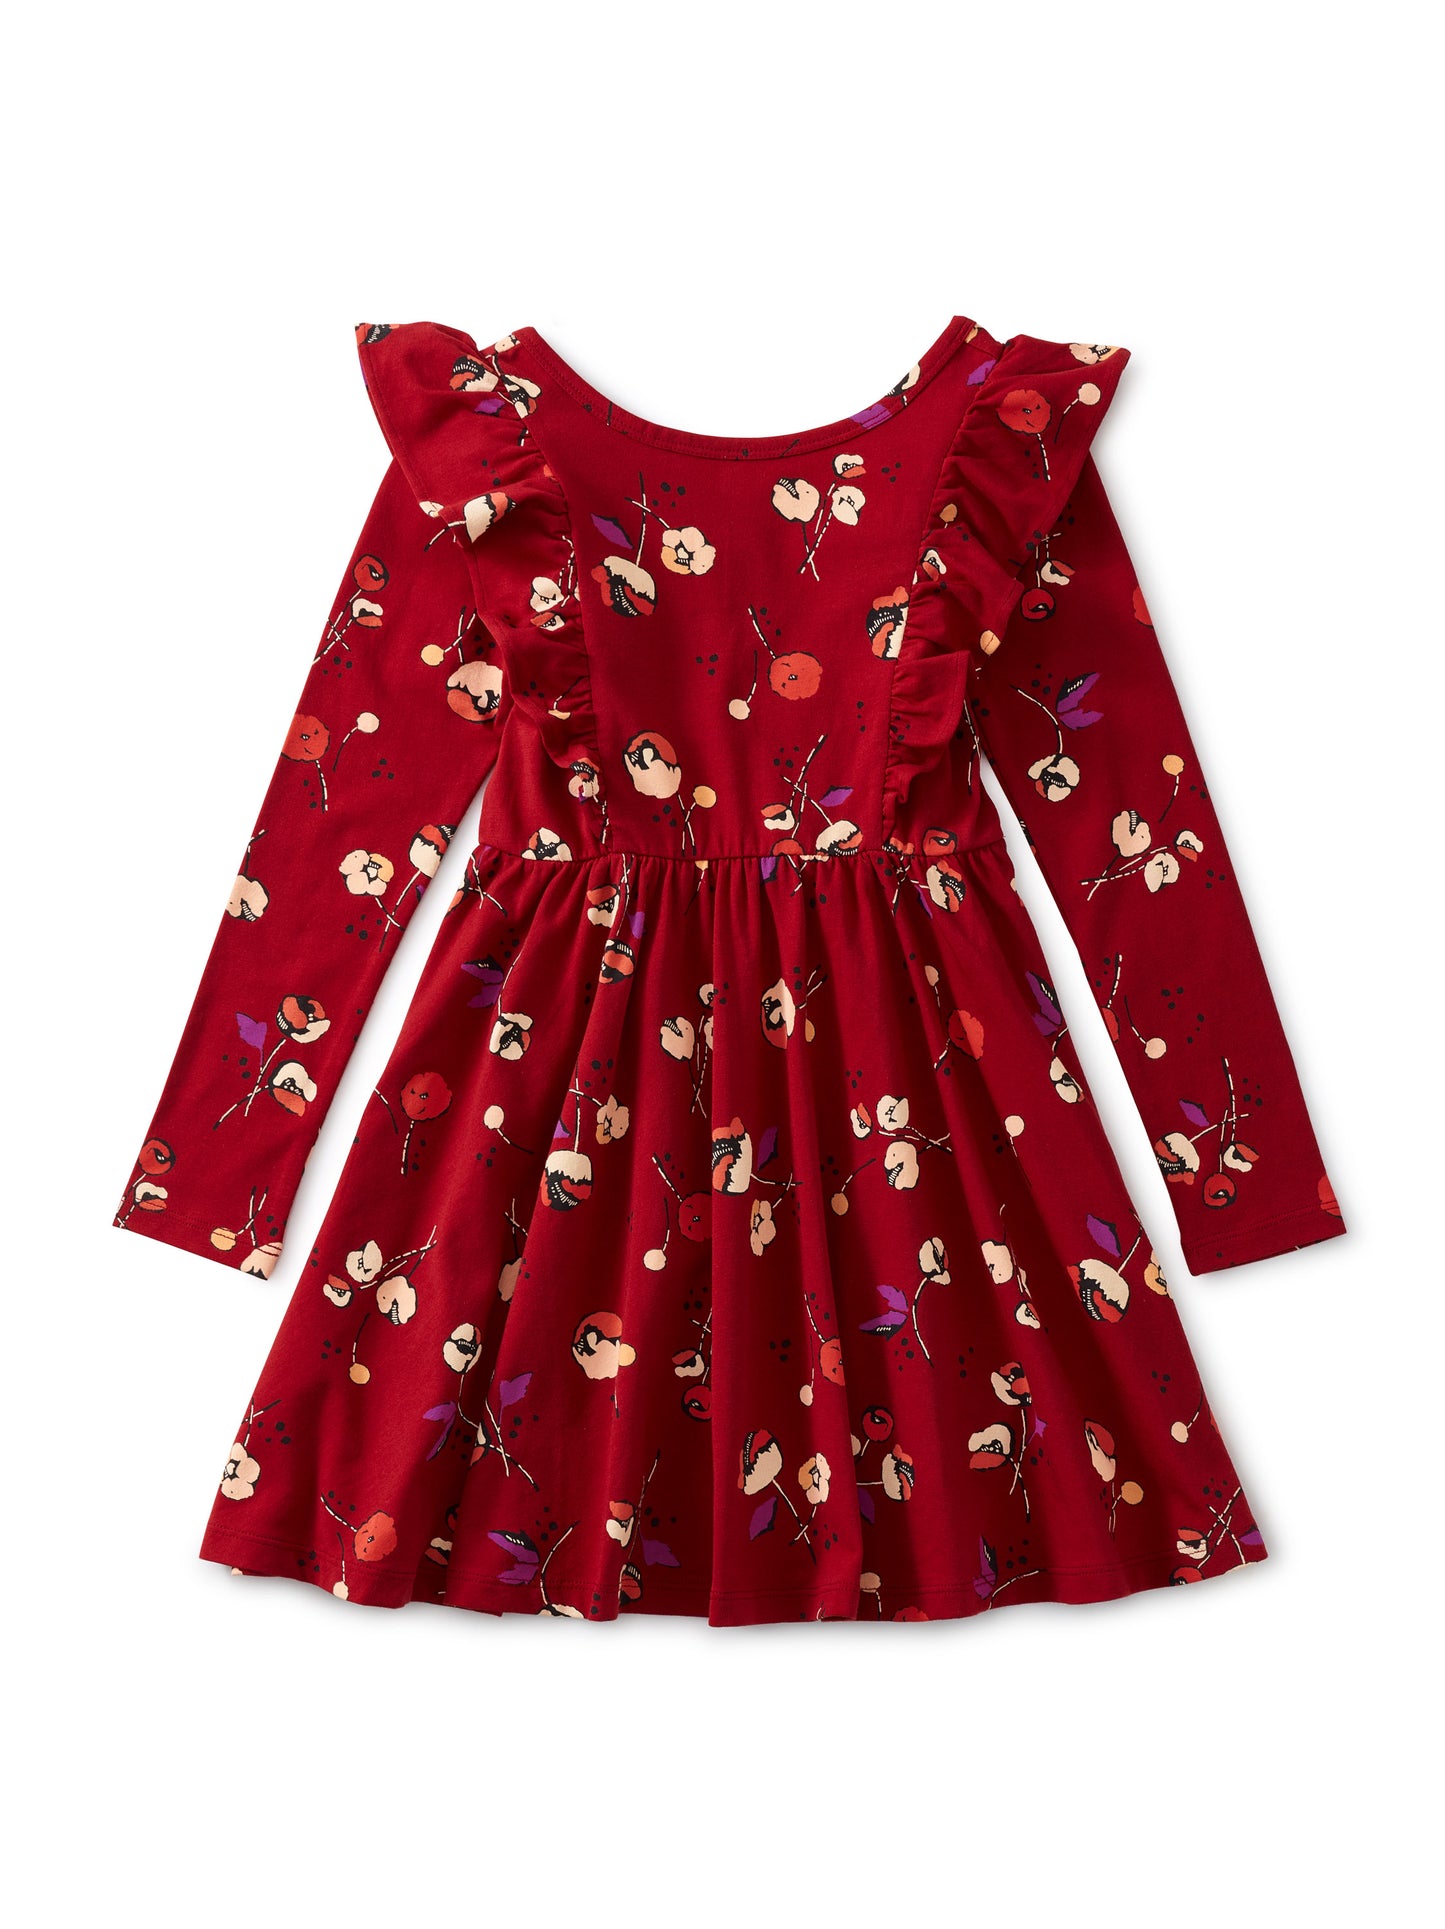 Ruffle Ballet Skirted Dress - Tossed Tulips in Red